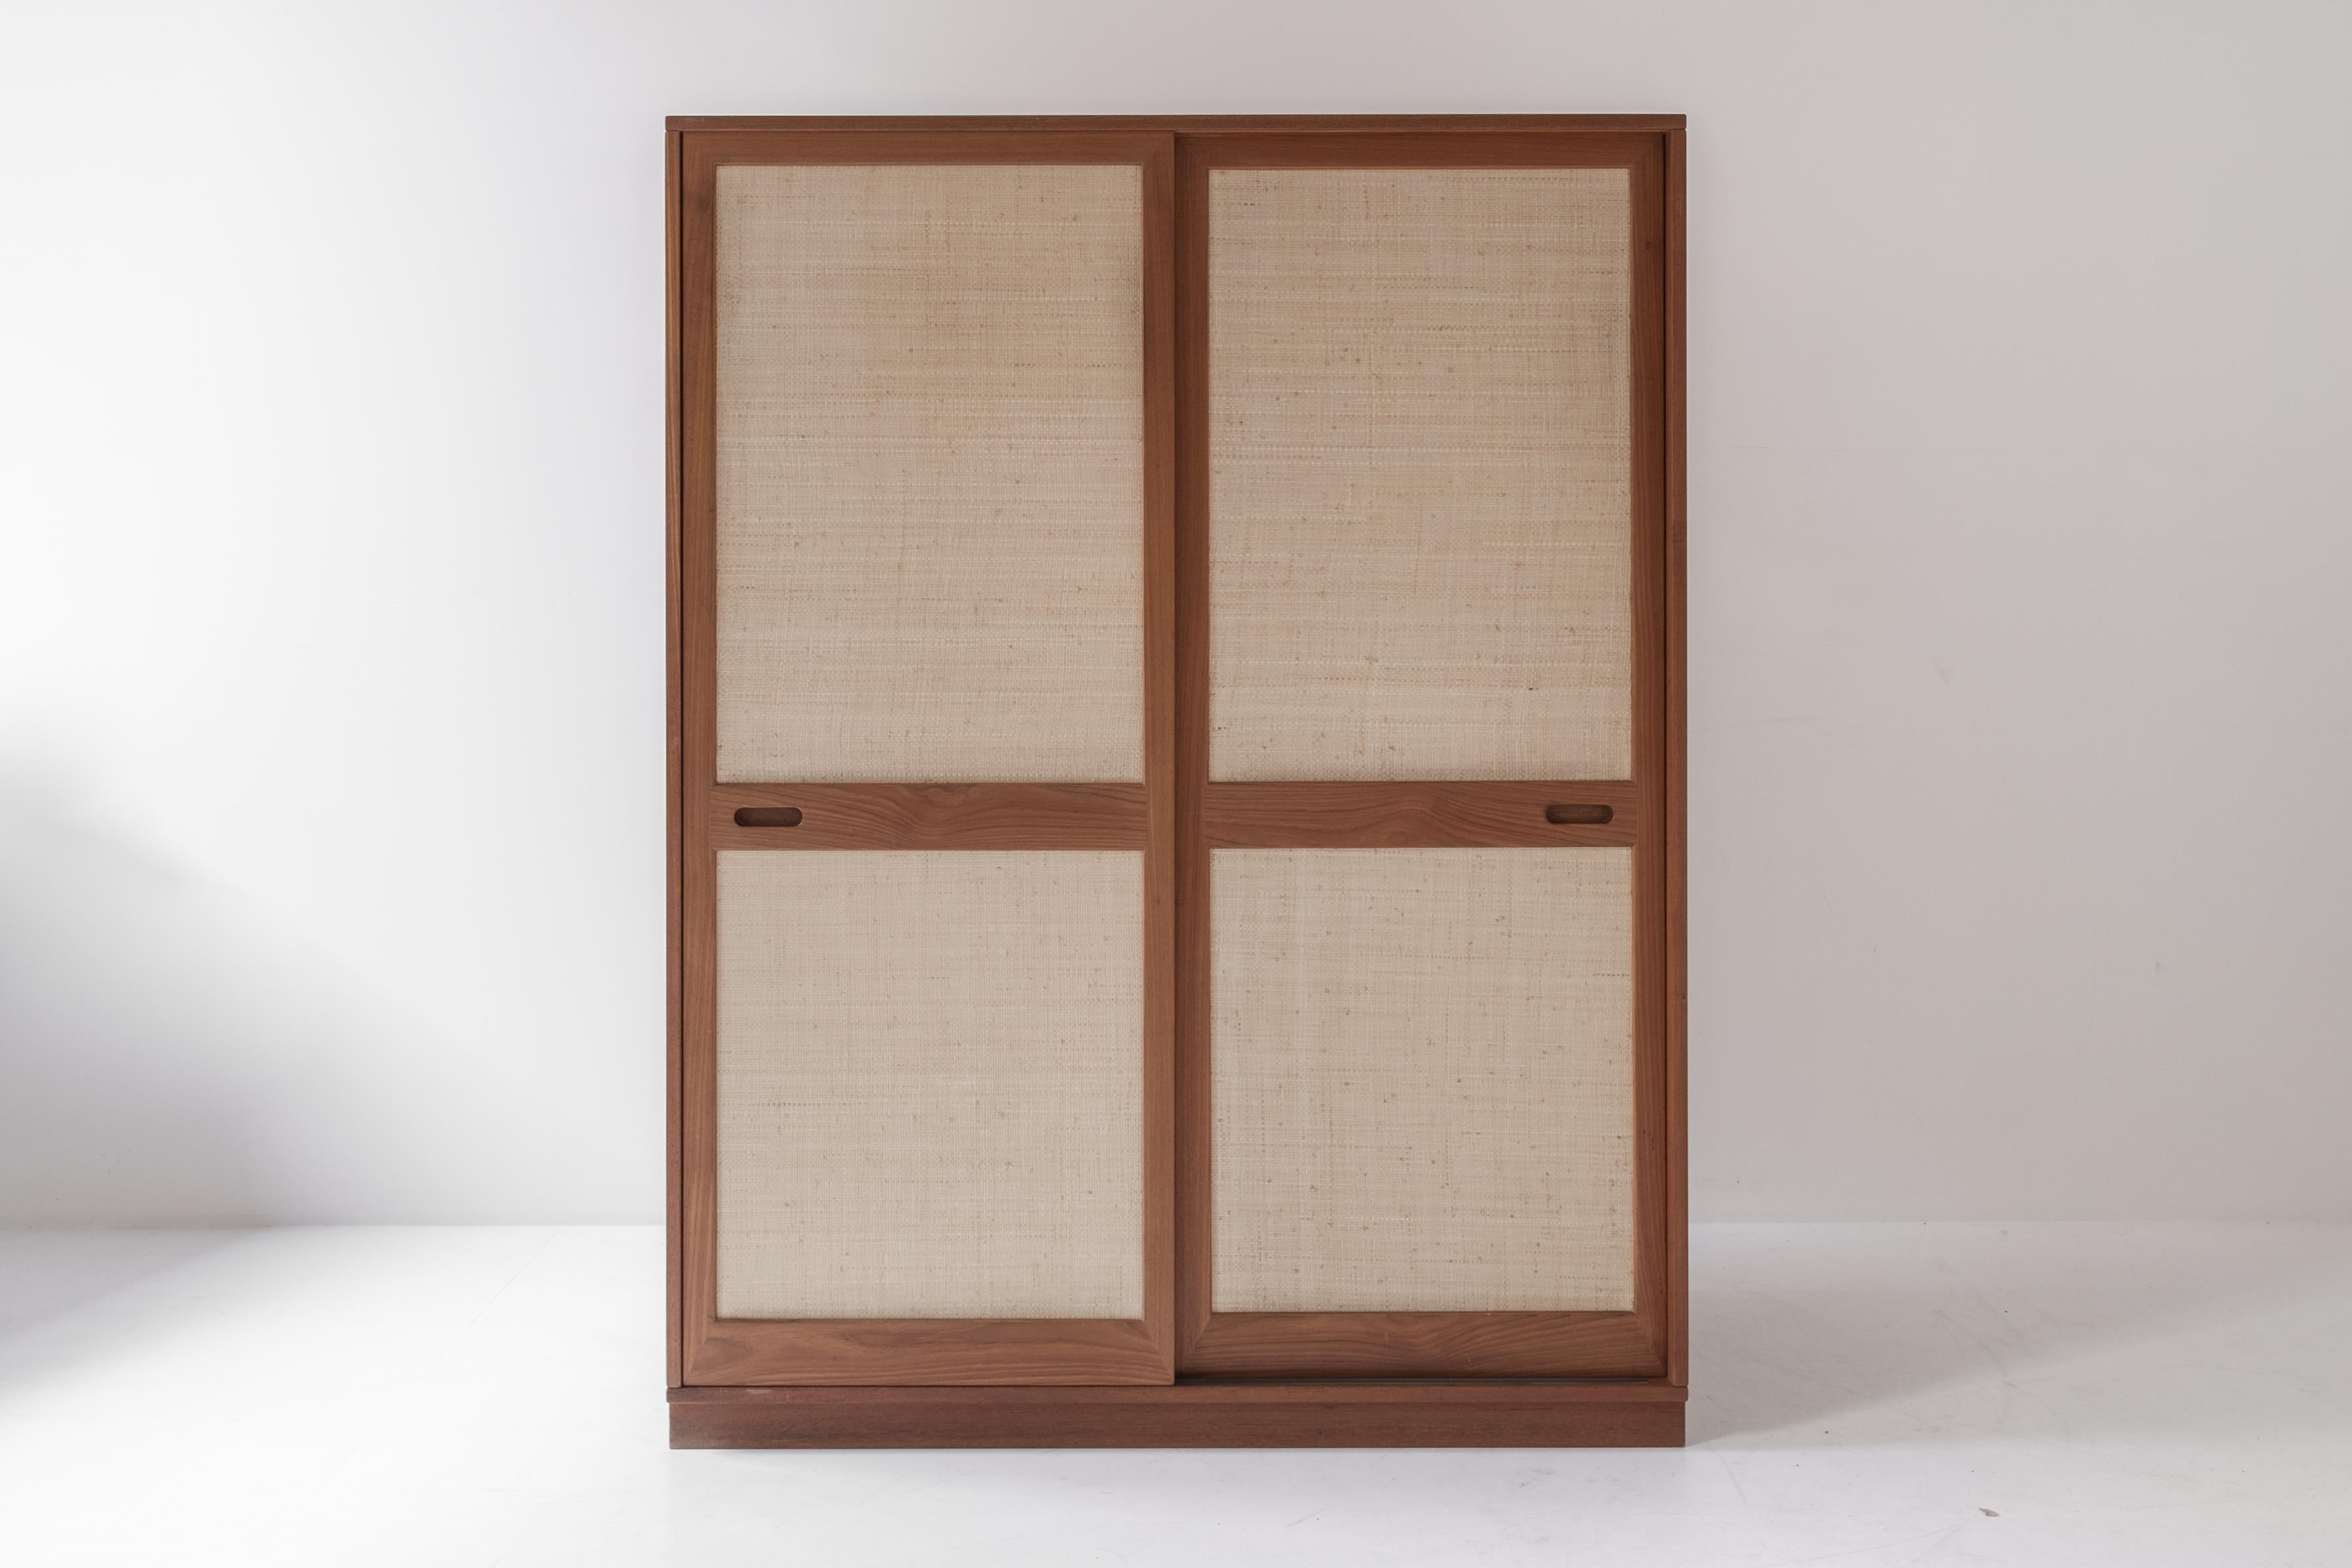 Very rare wardrobe dresser manufactured by Sibast Furniture, Denmark 1960s. This cabinet is made out of teak and features seagrass sliding front panels. The interior features a coat hanger and a chrome bar on the left. On the right a series of